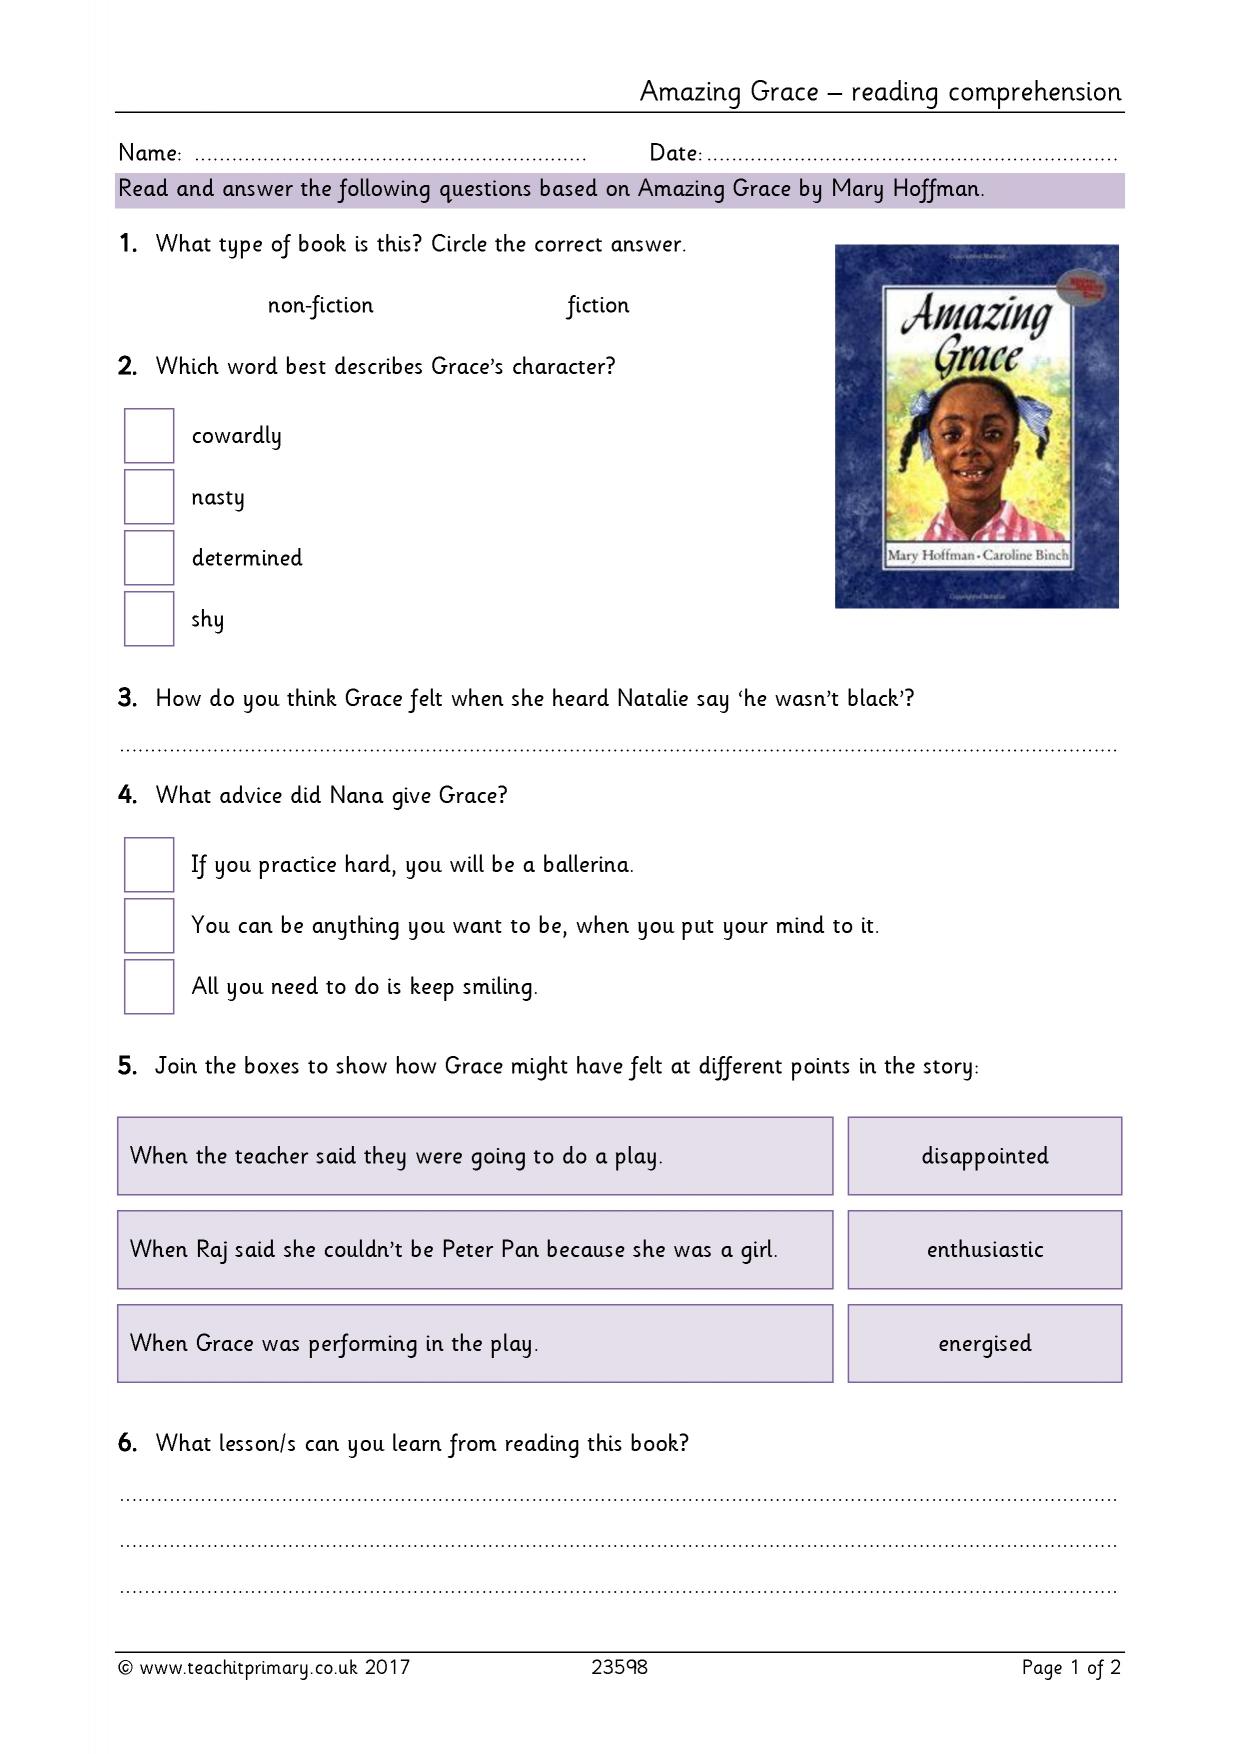 Reading Prehension Teaching Resources For FS KS1 And